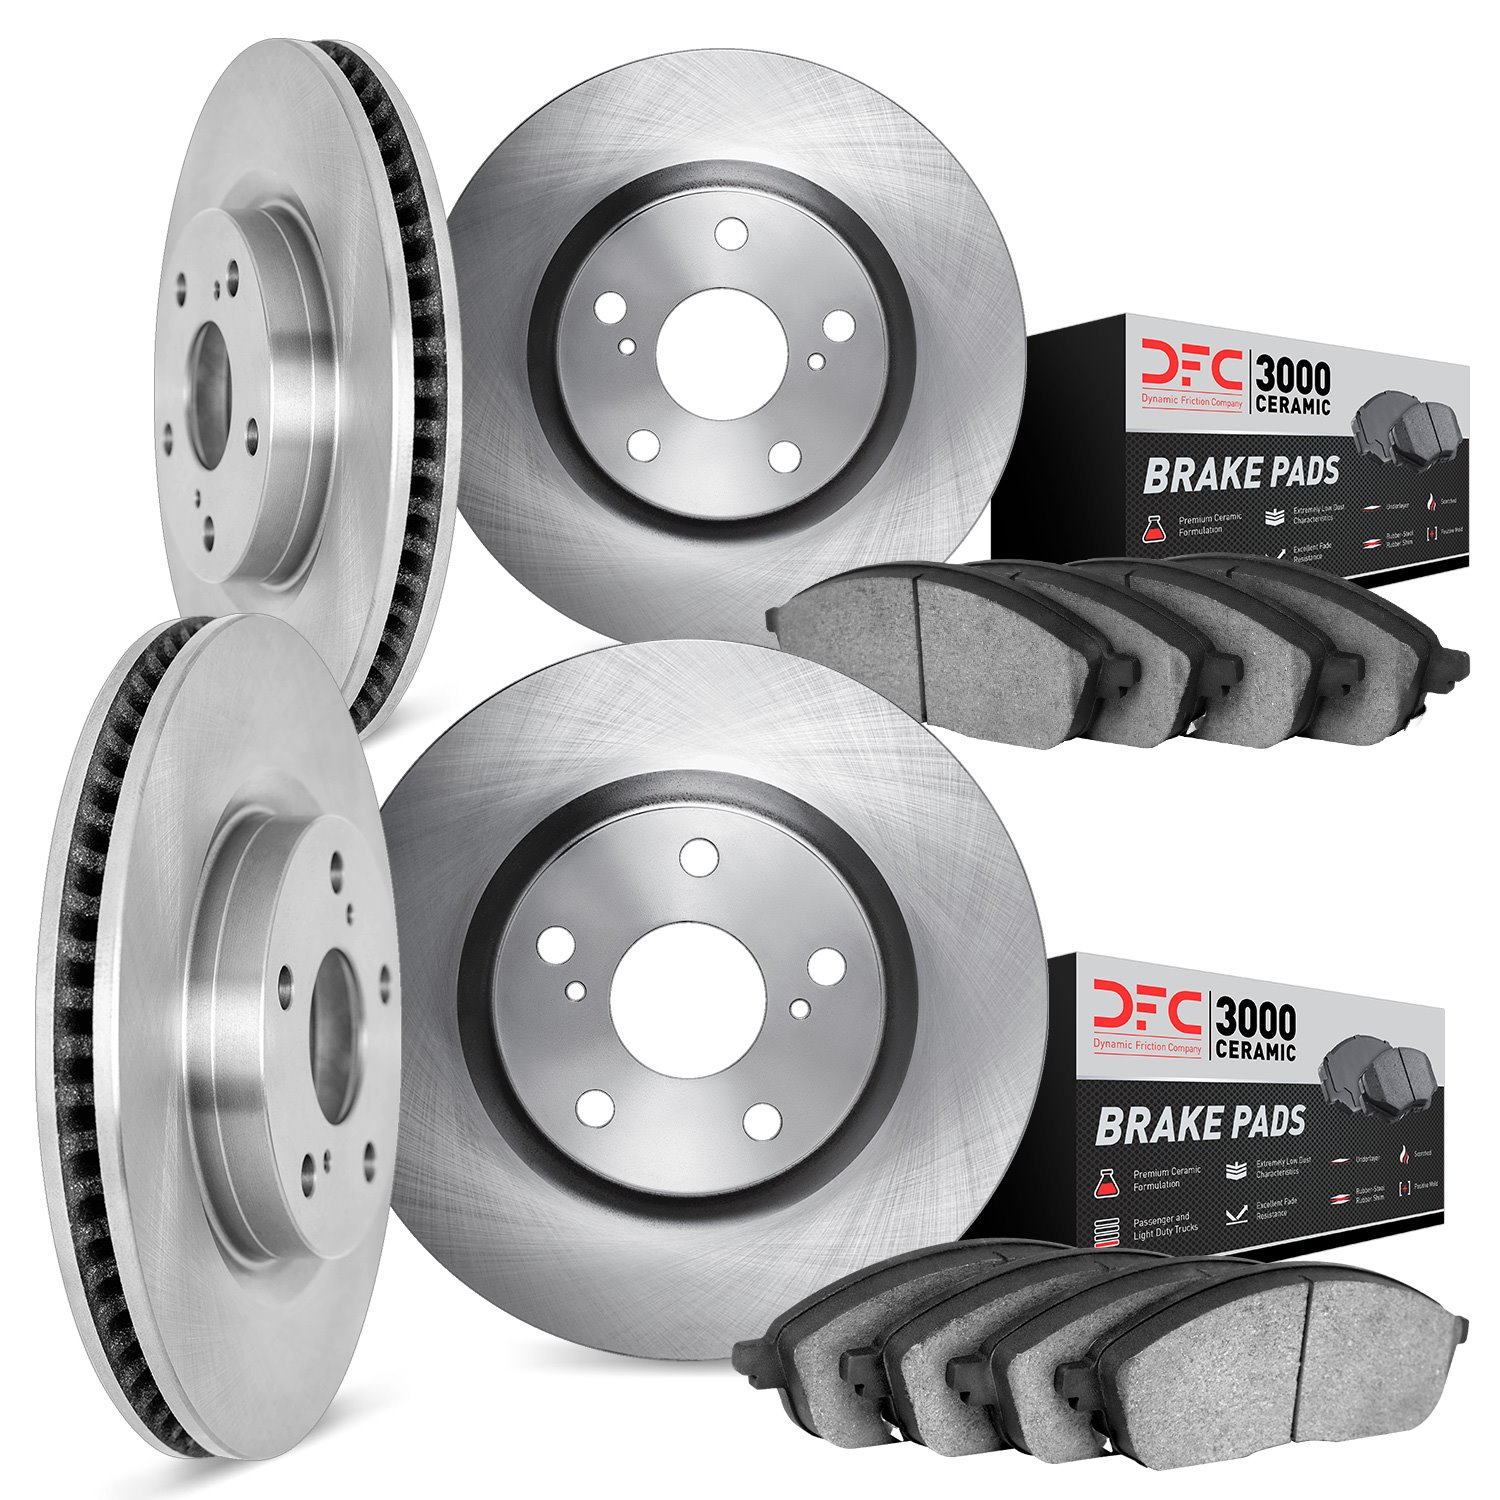 6304-74005 Brake Rotors with 3000-Series Ceramic Brake Pads Kit, 2002-2005 Audi/Volkswagen, Position: Front and Rear